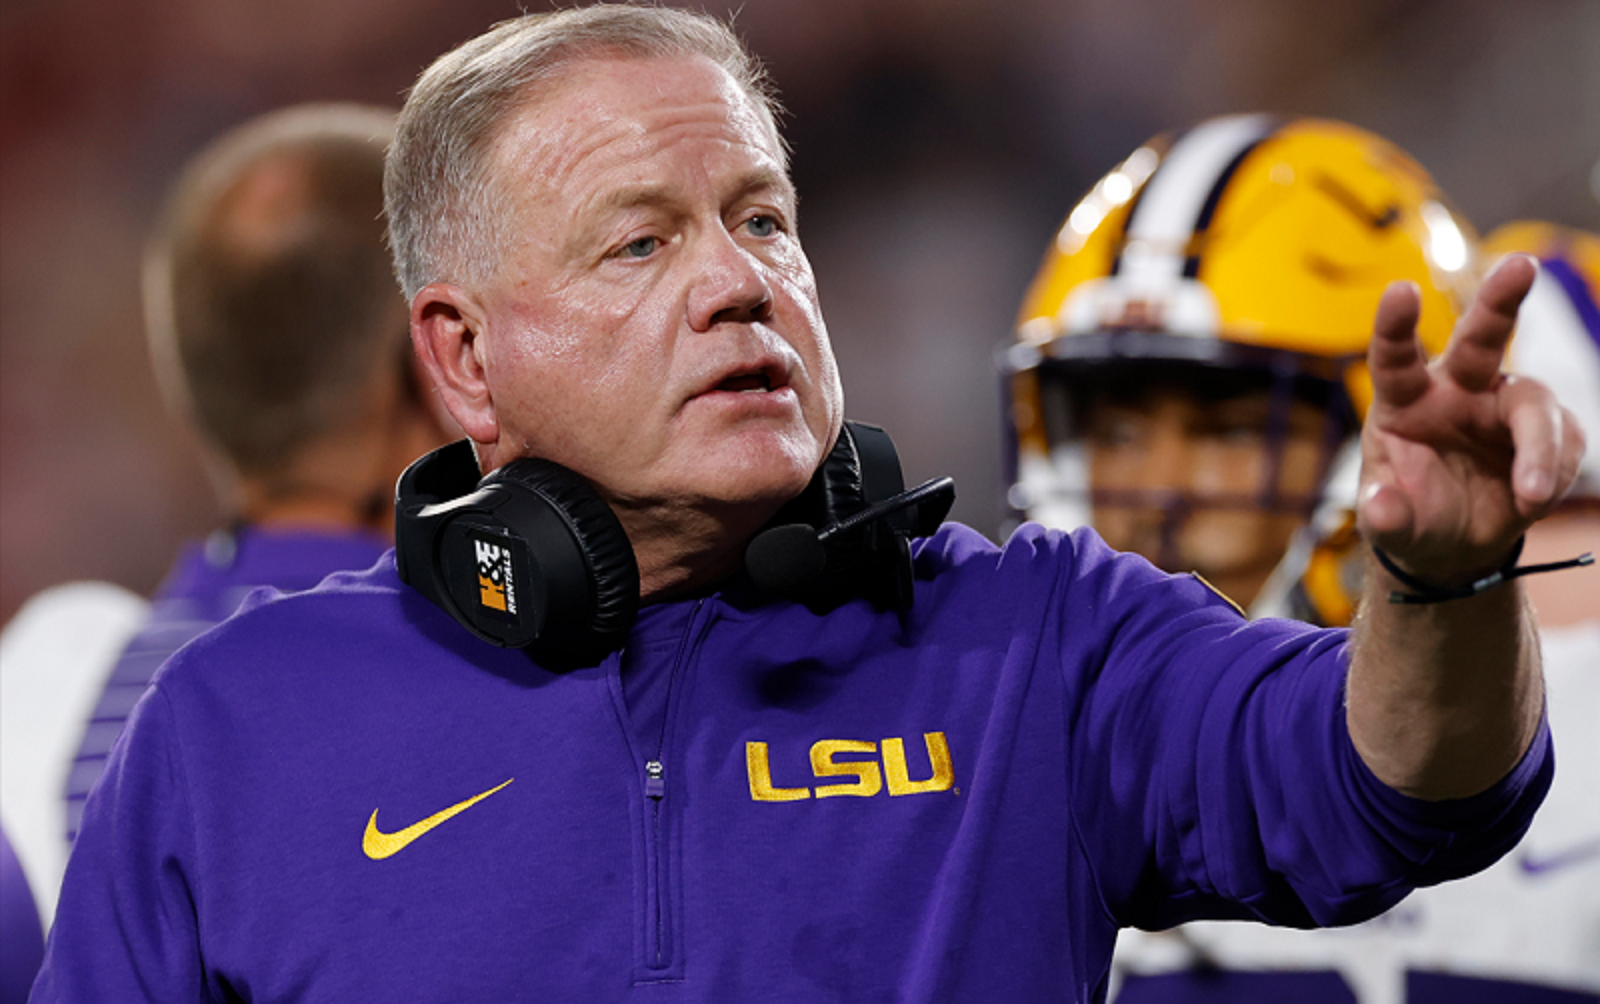 Brian Kelly denies saying LSU would 'go beat the heck out of Florida State